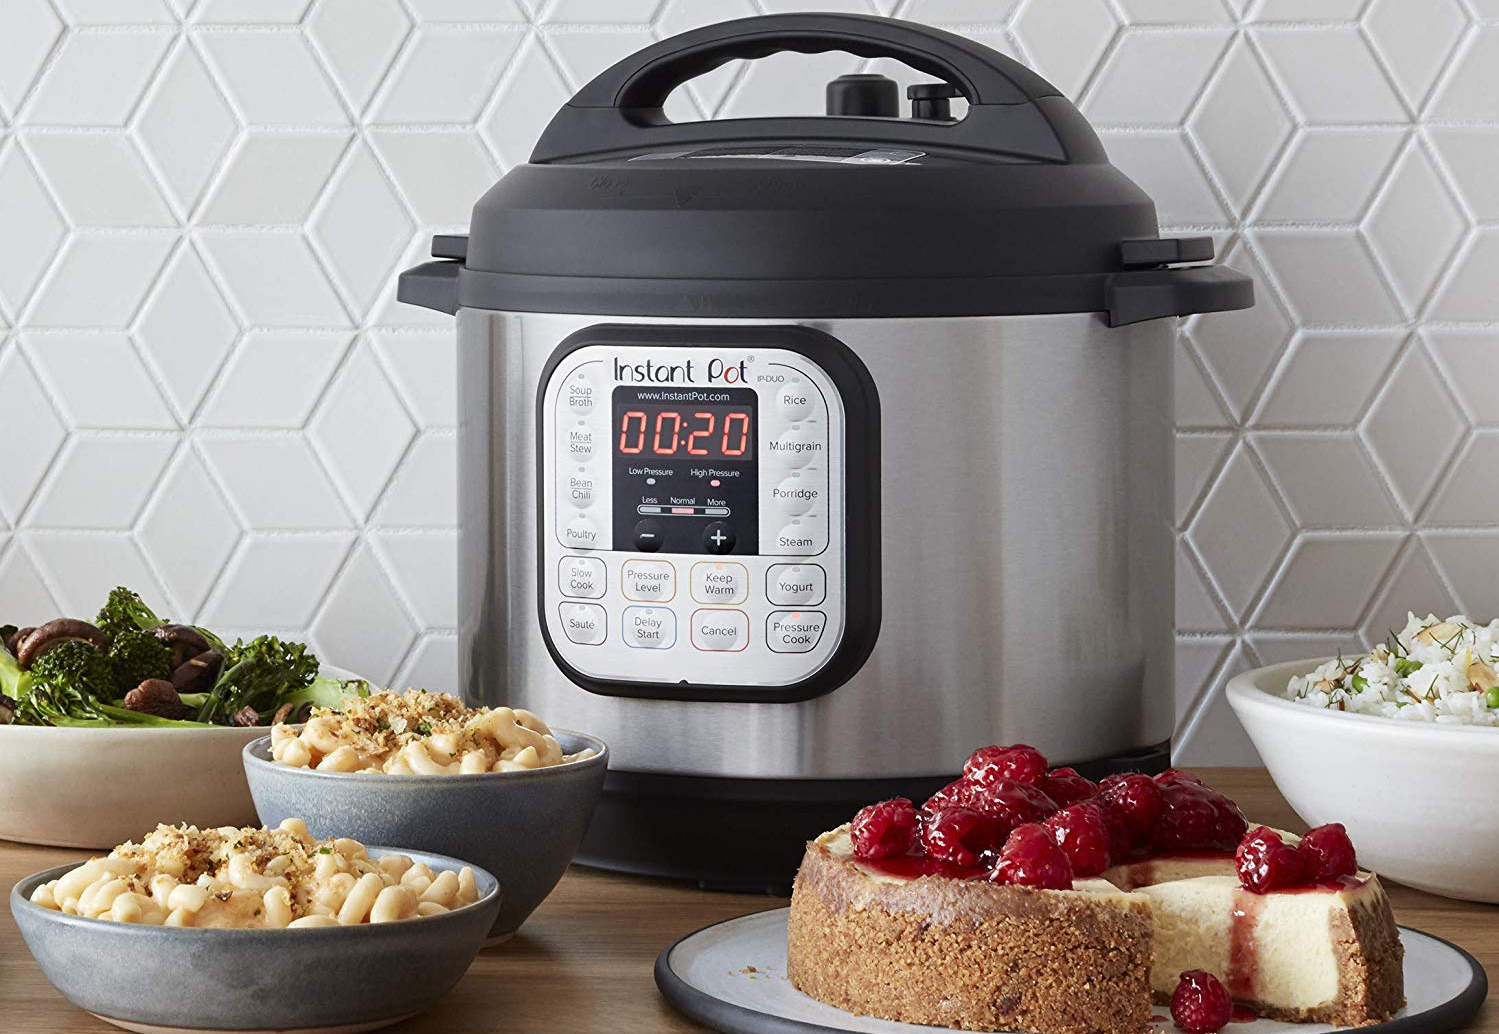 Ninja Foodi vs Instant Pot: Which one to buy on Black Friday